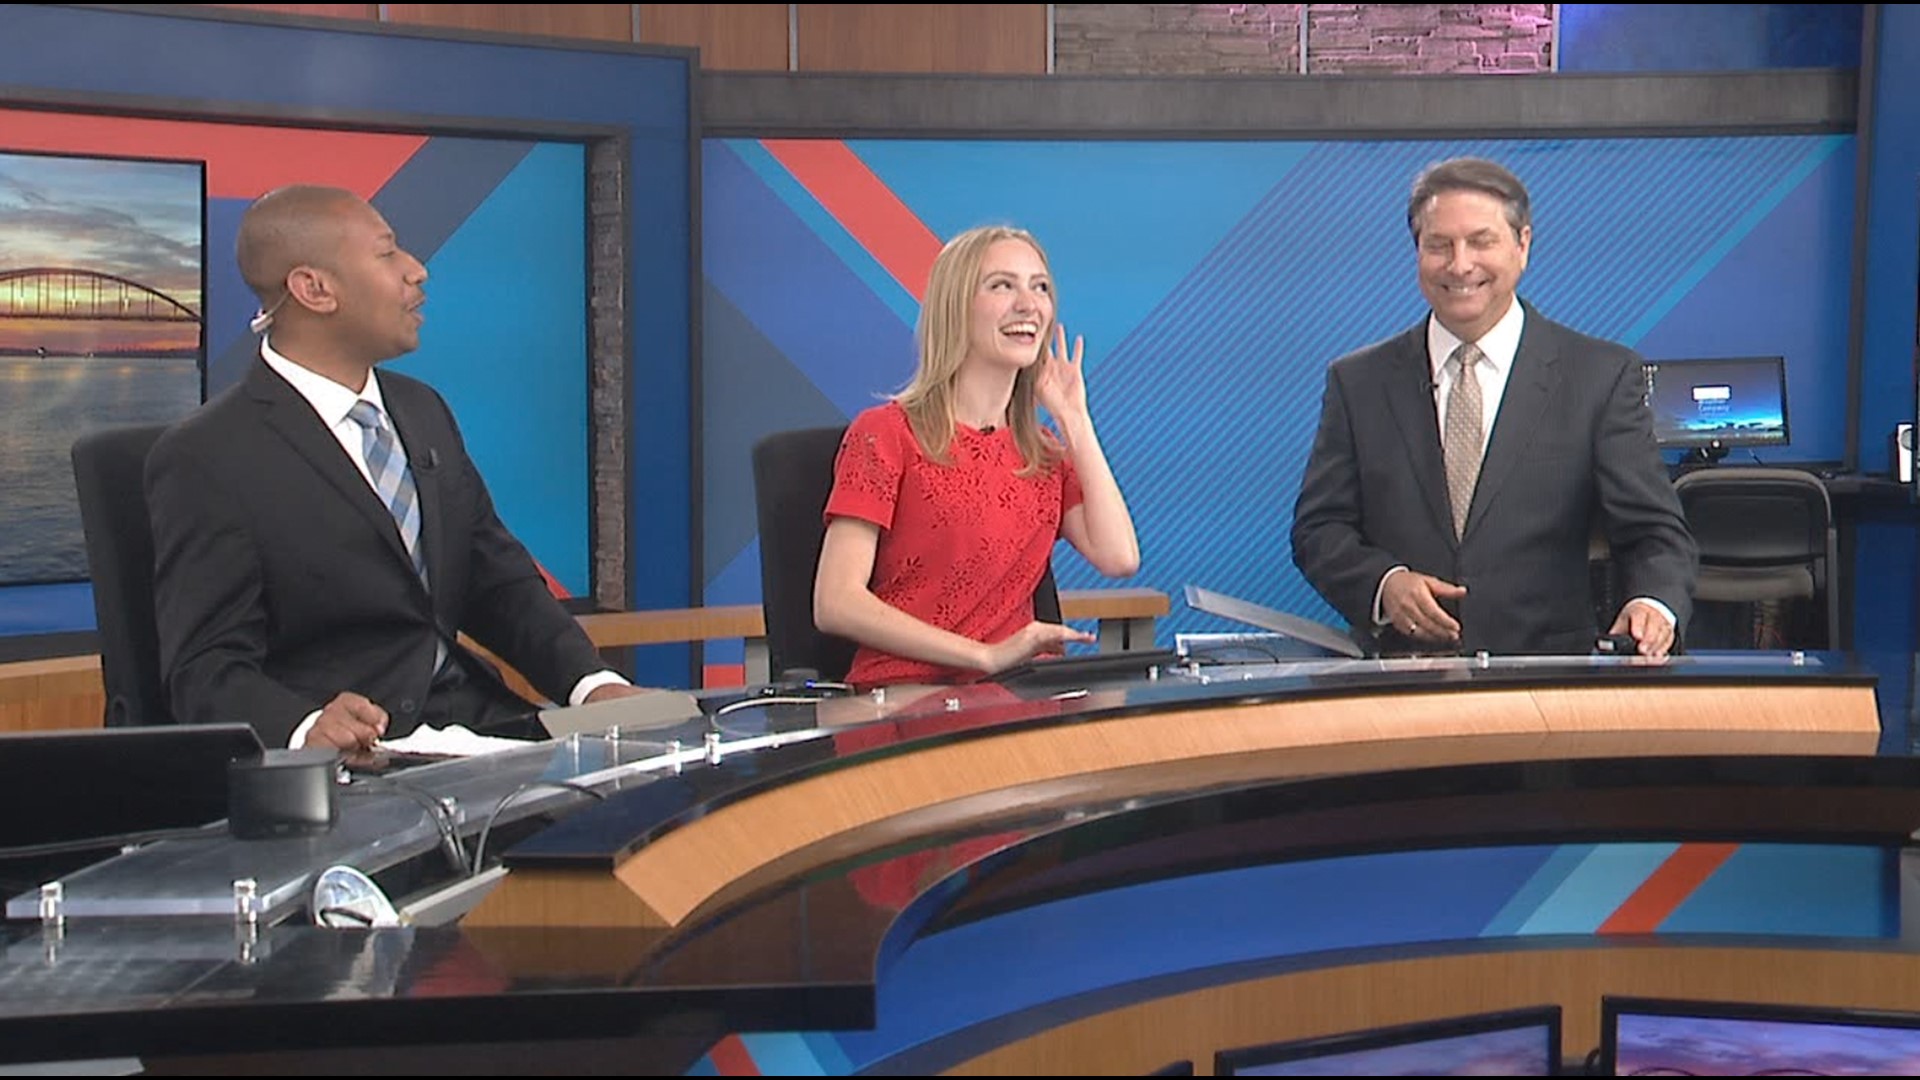 Shelby and James certainly weren't prepared for Devin's sound effects on this evening's 5pm show!